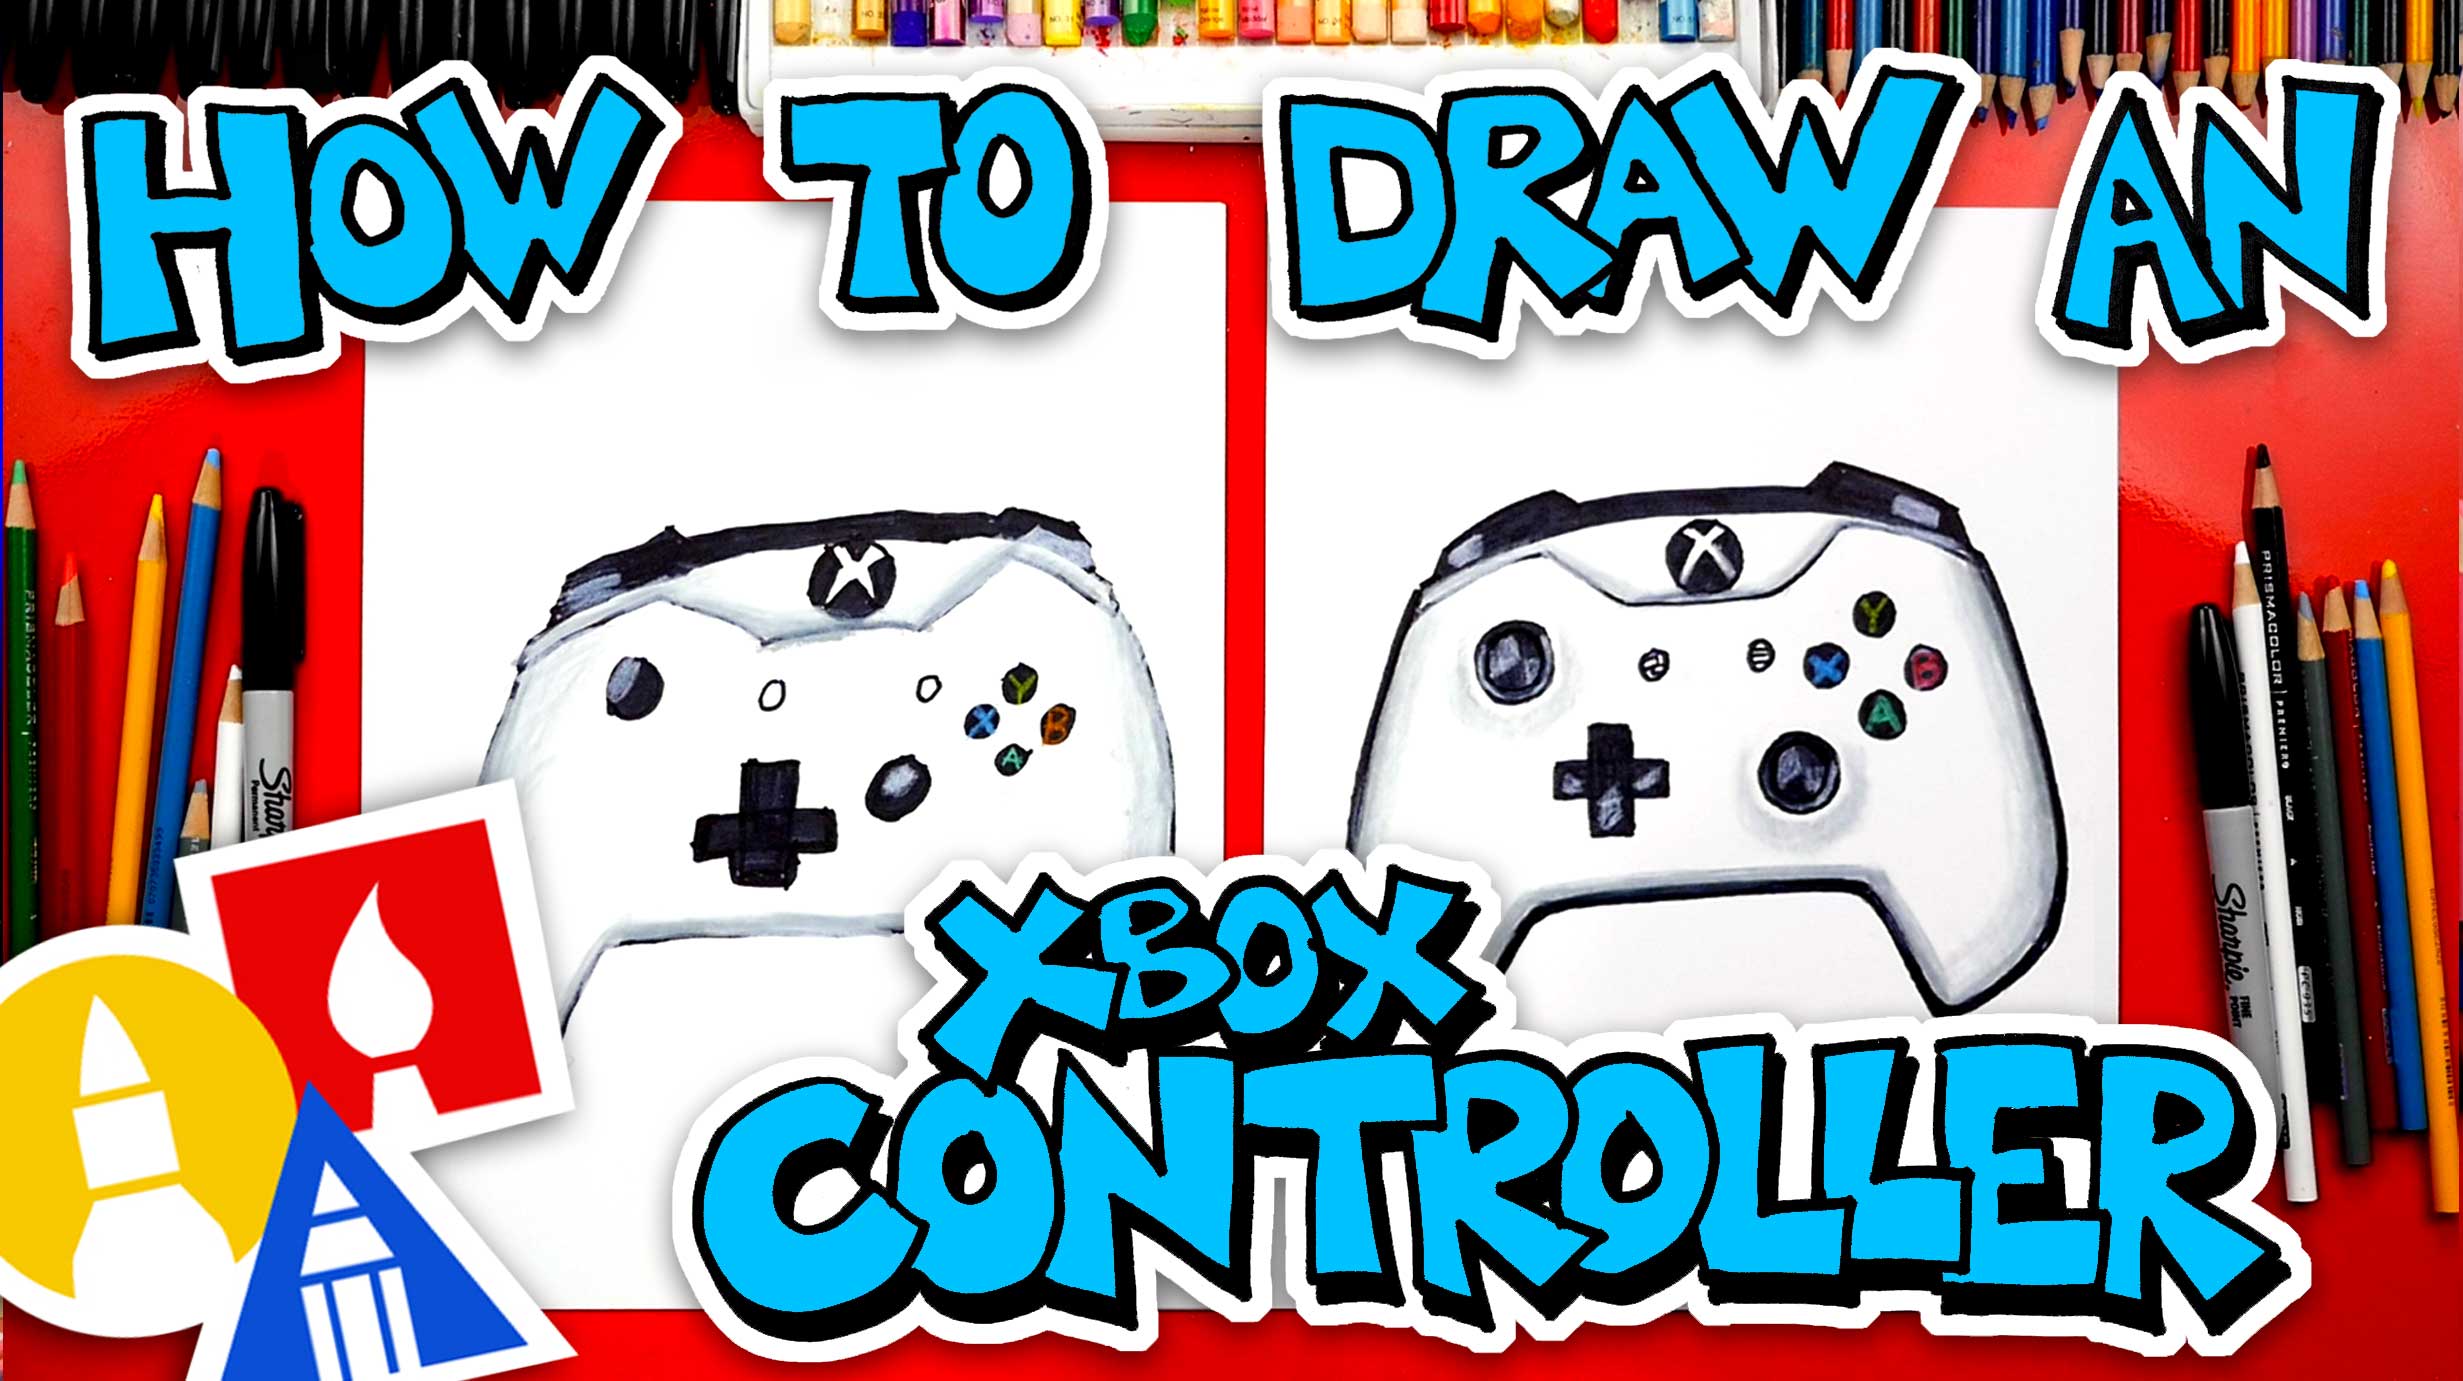 How To Draw An Xbox Controller Art For Kids Hub